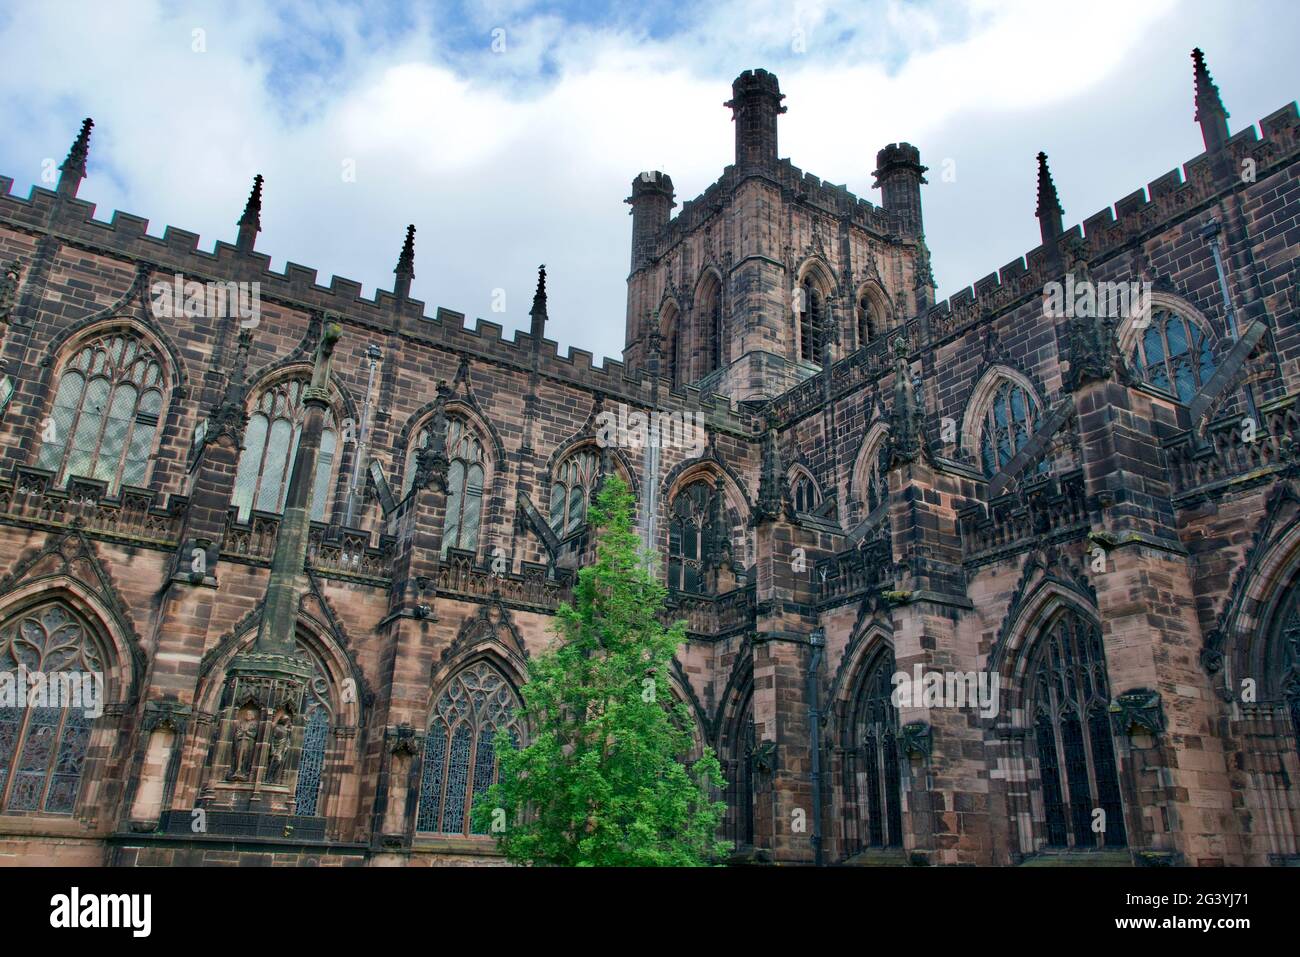 10 June 2021 - Chester UK: View of Chester Cathedral Stock Photo